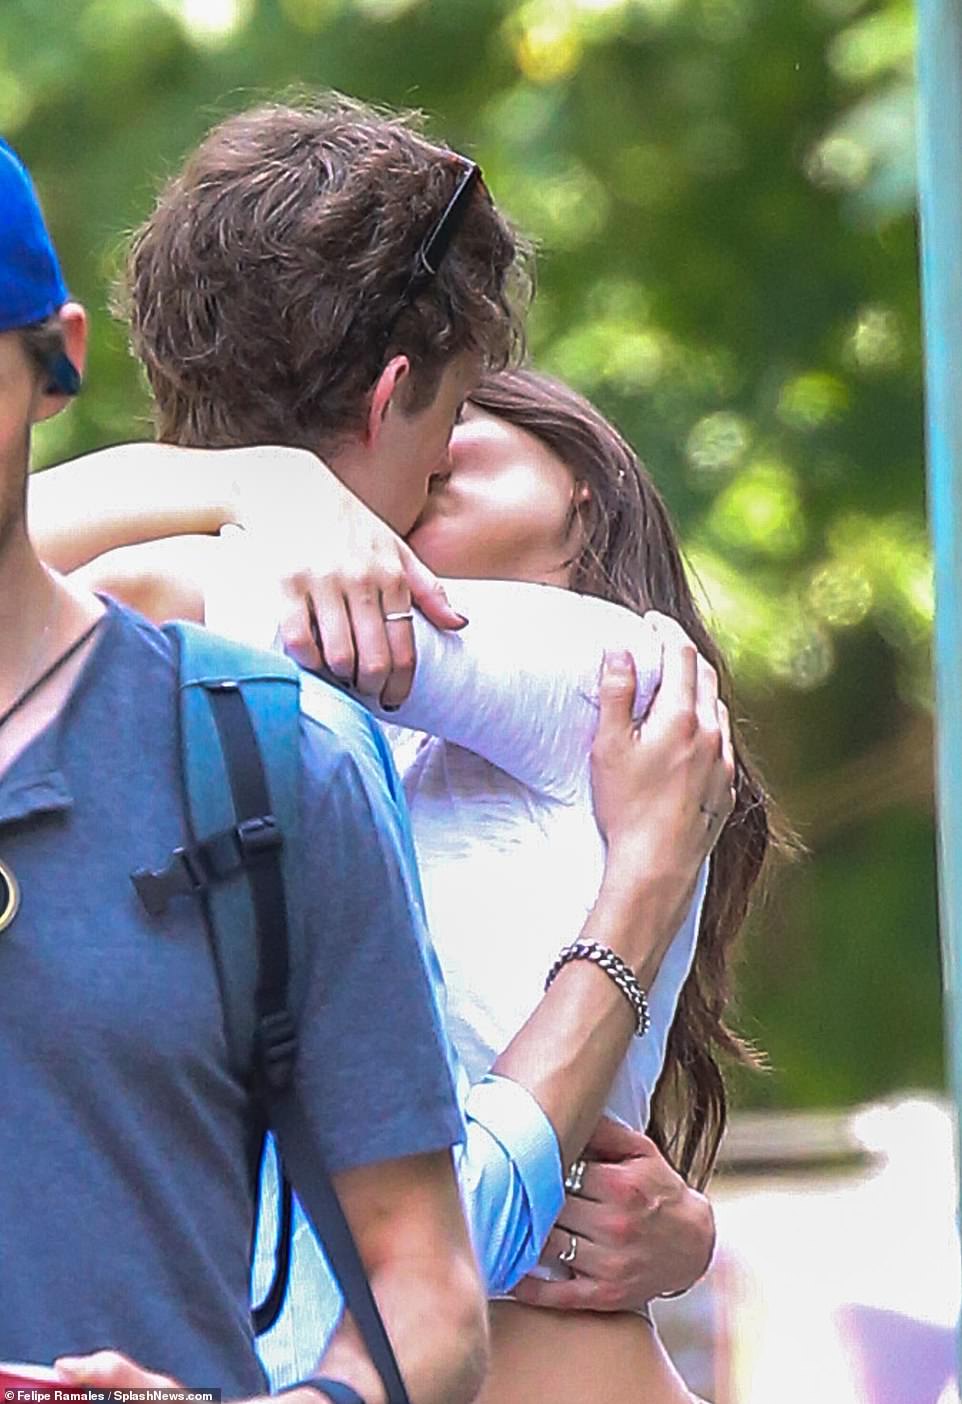 The teenage couple was seen kissing on the street during the day